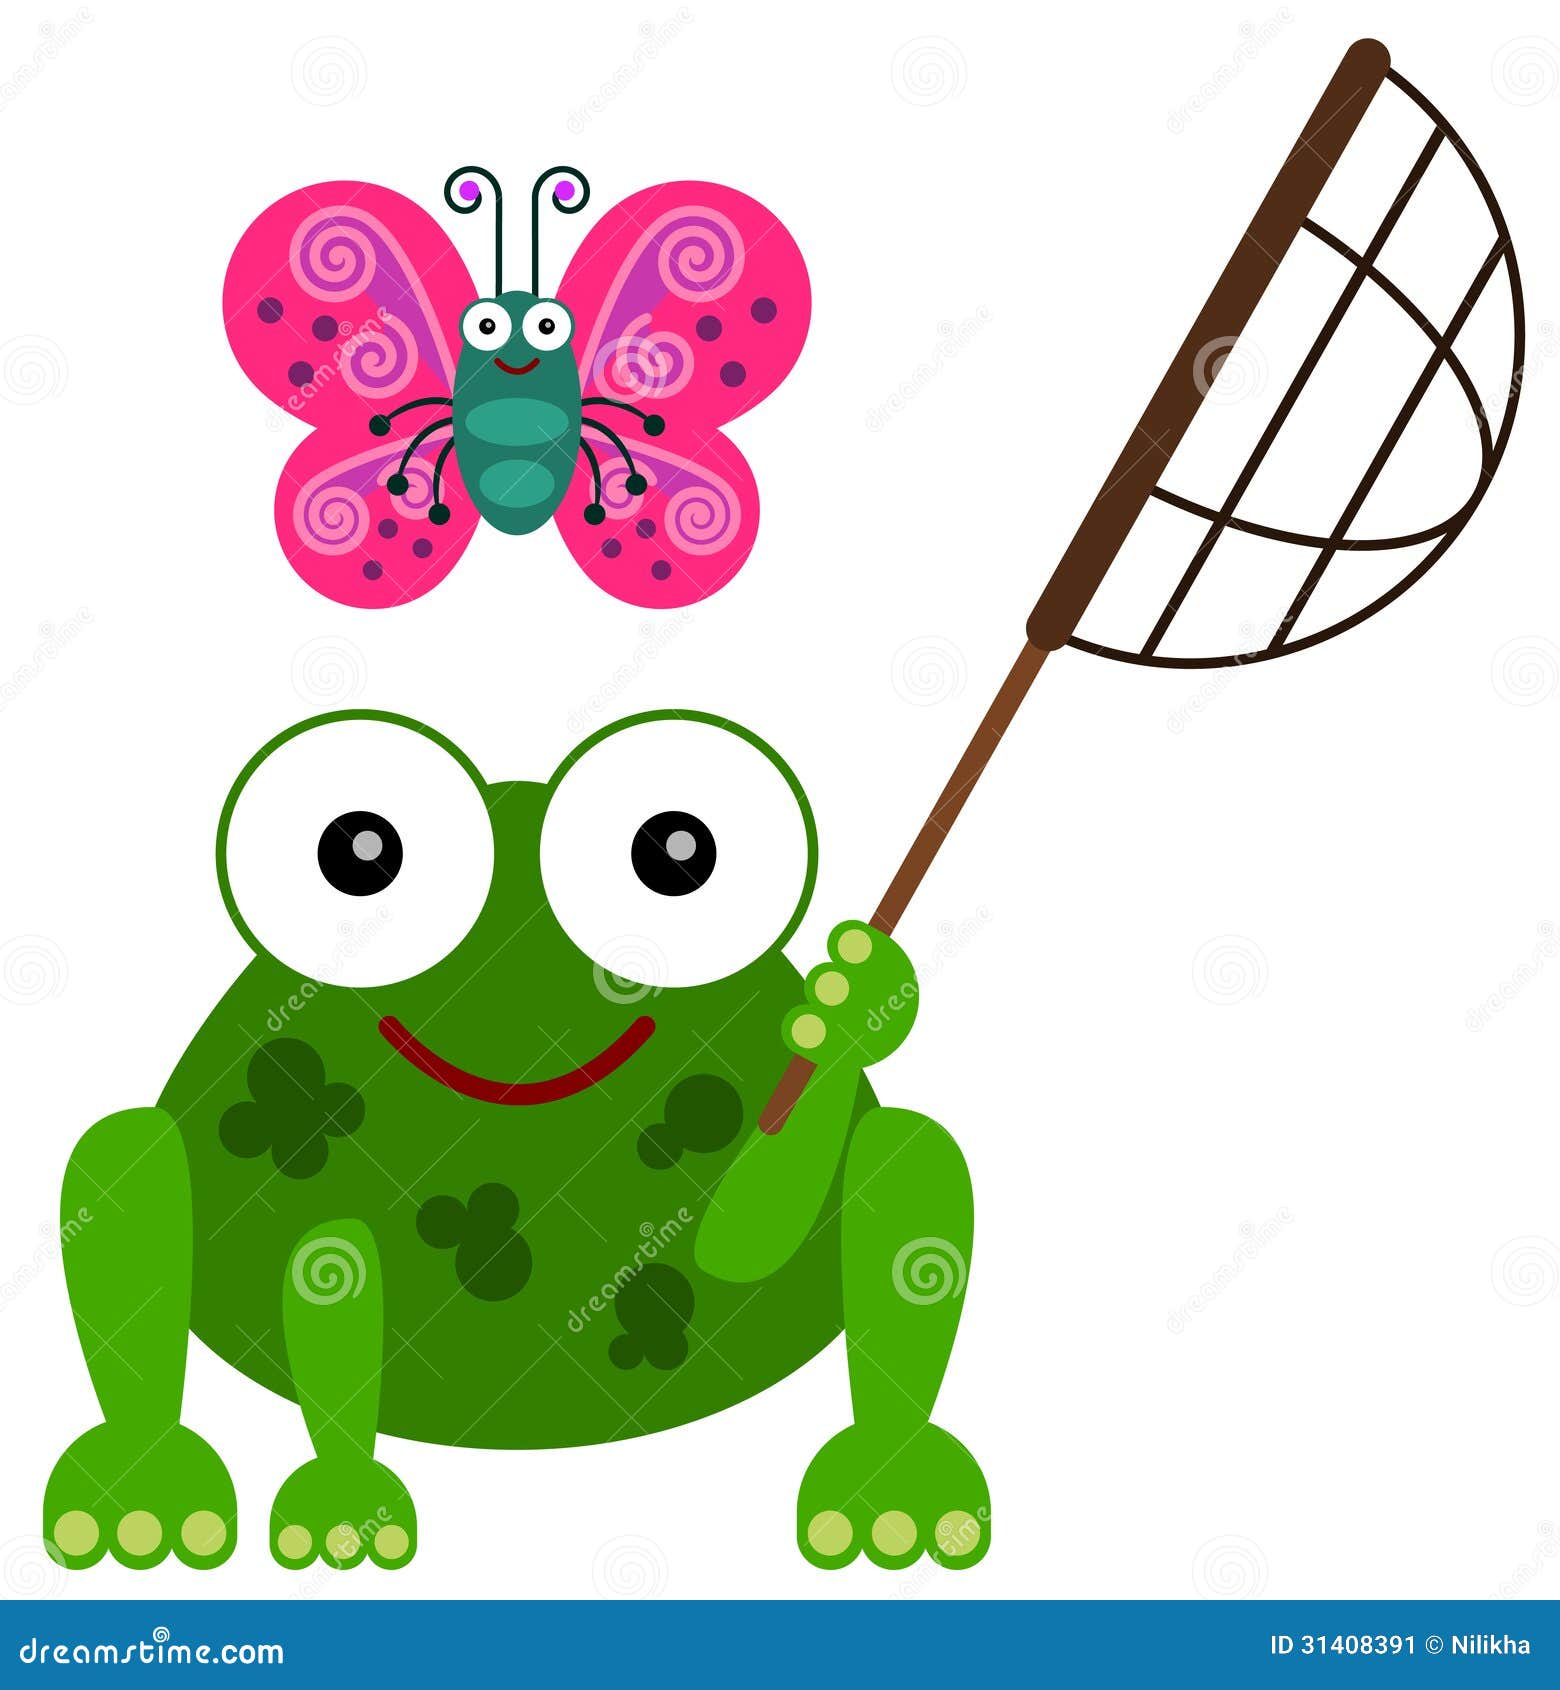 https://thumbs.dreamstime.com/z/frog-s-hobby-illustration-net-trying-to-catch-butterfly-31408391.jpg